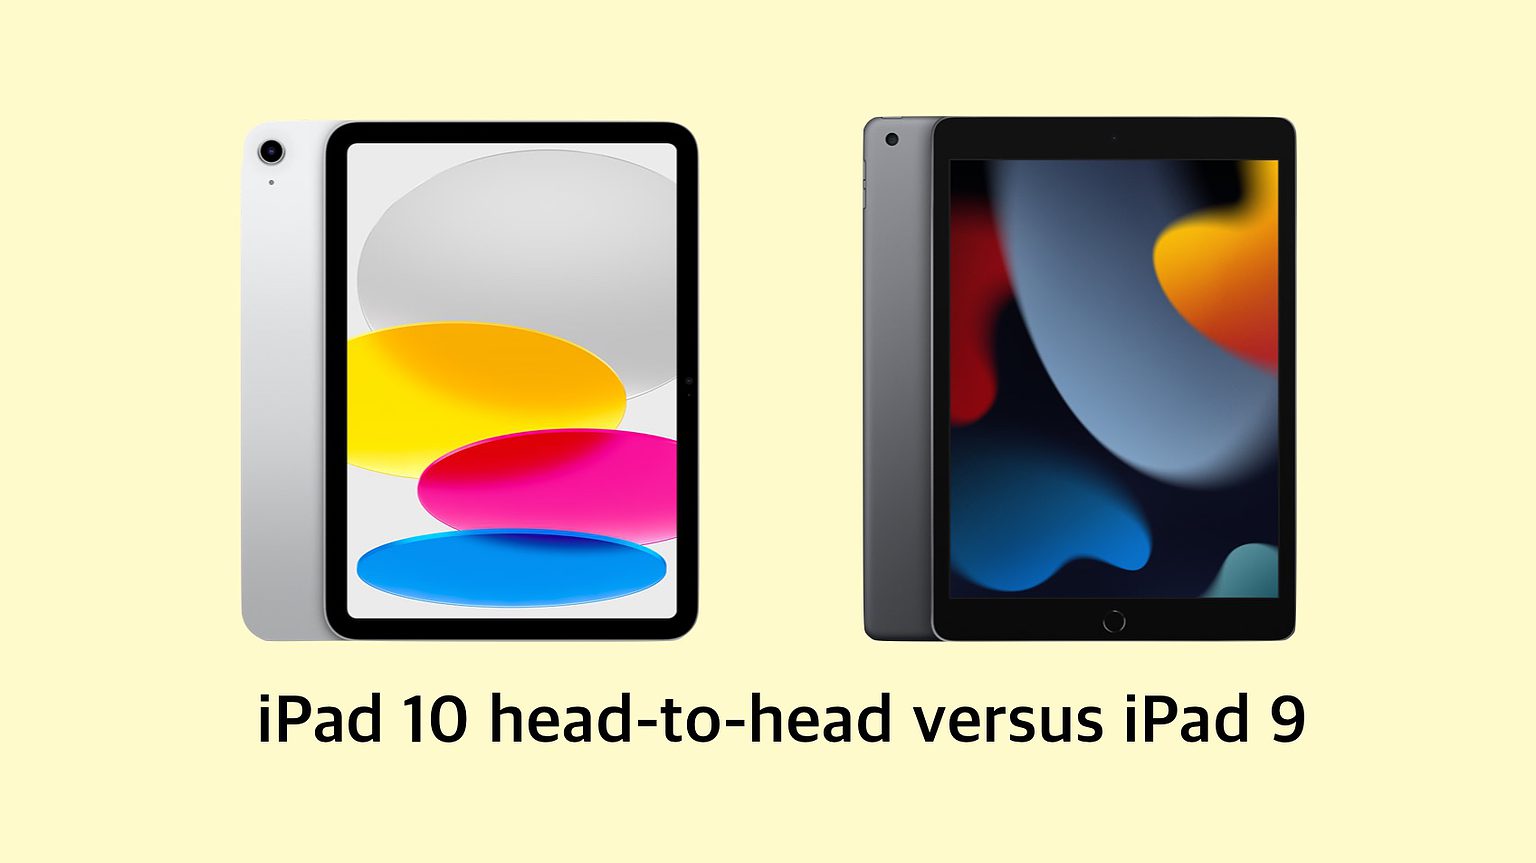 iPad 9 vs. iPad 10: Which offers more bang for the buck?